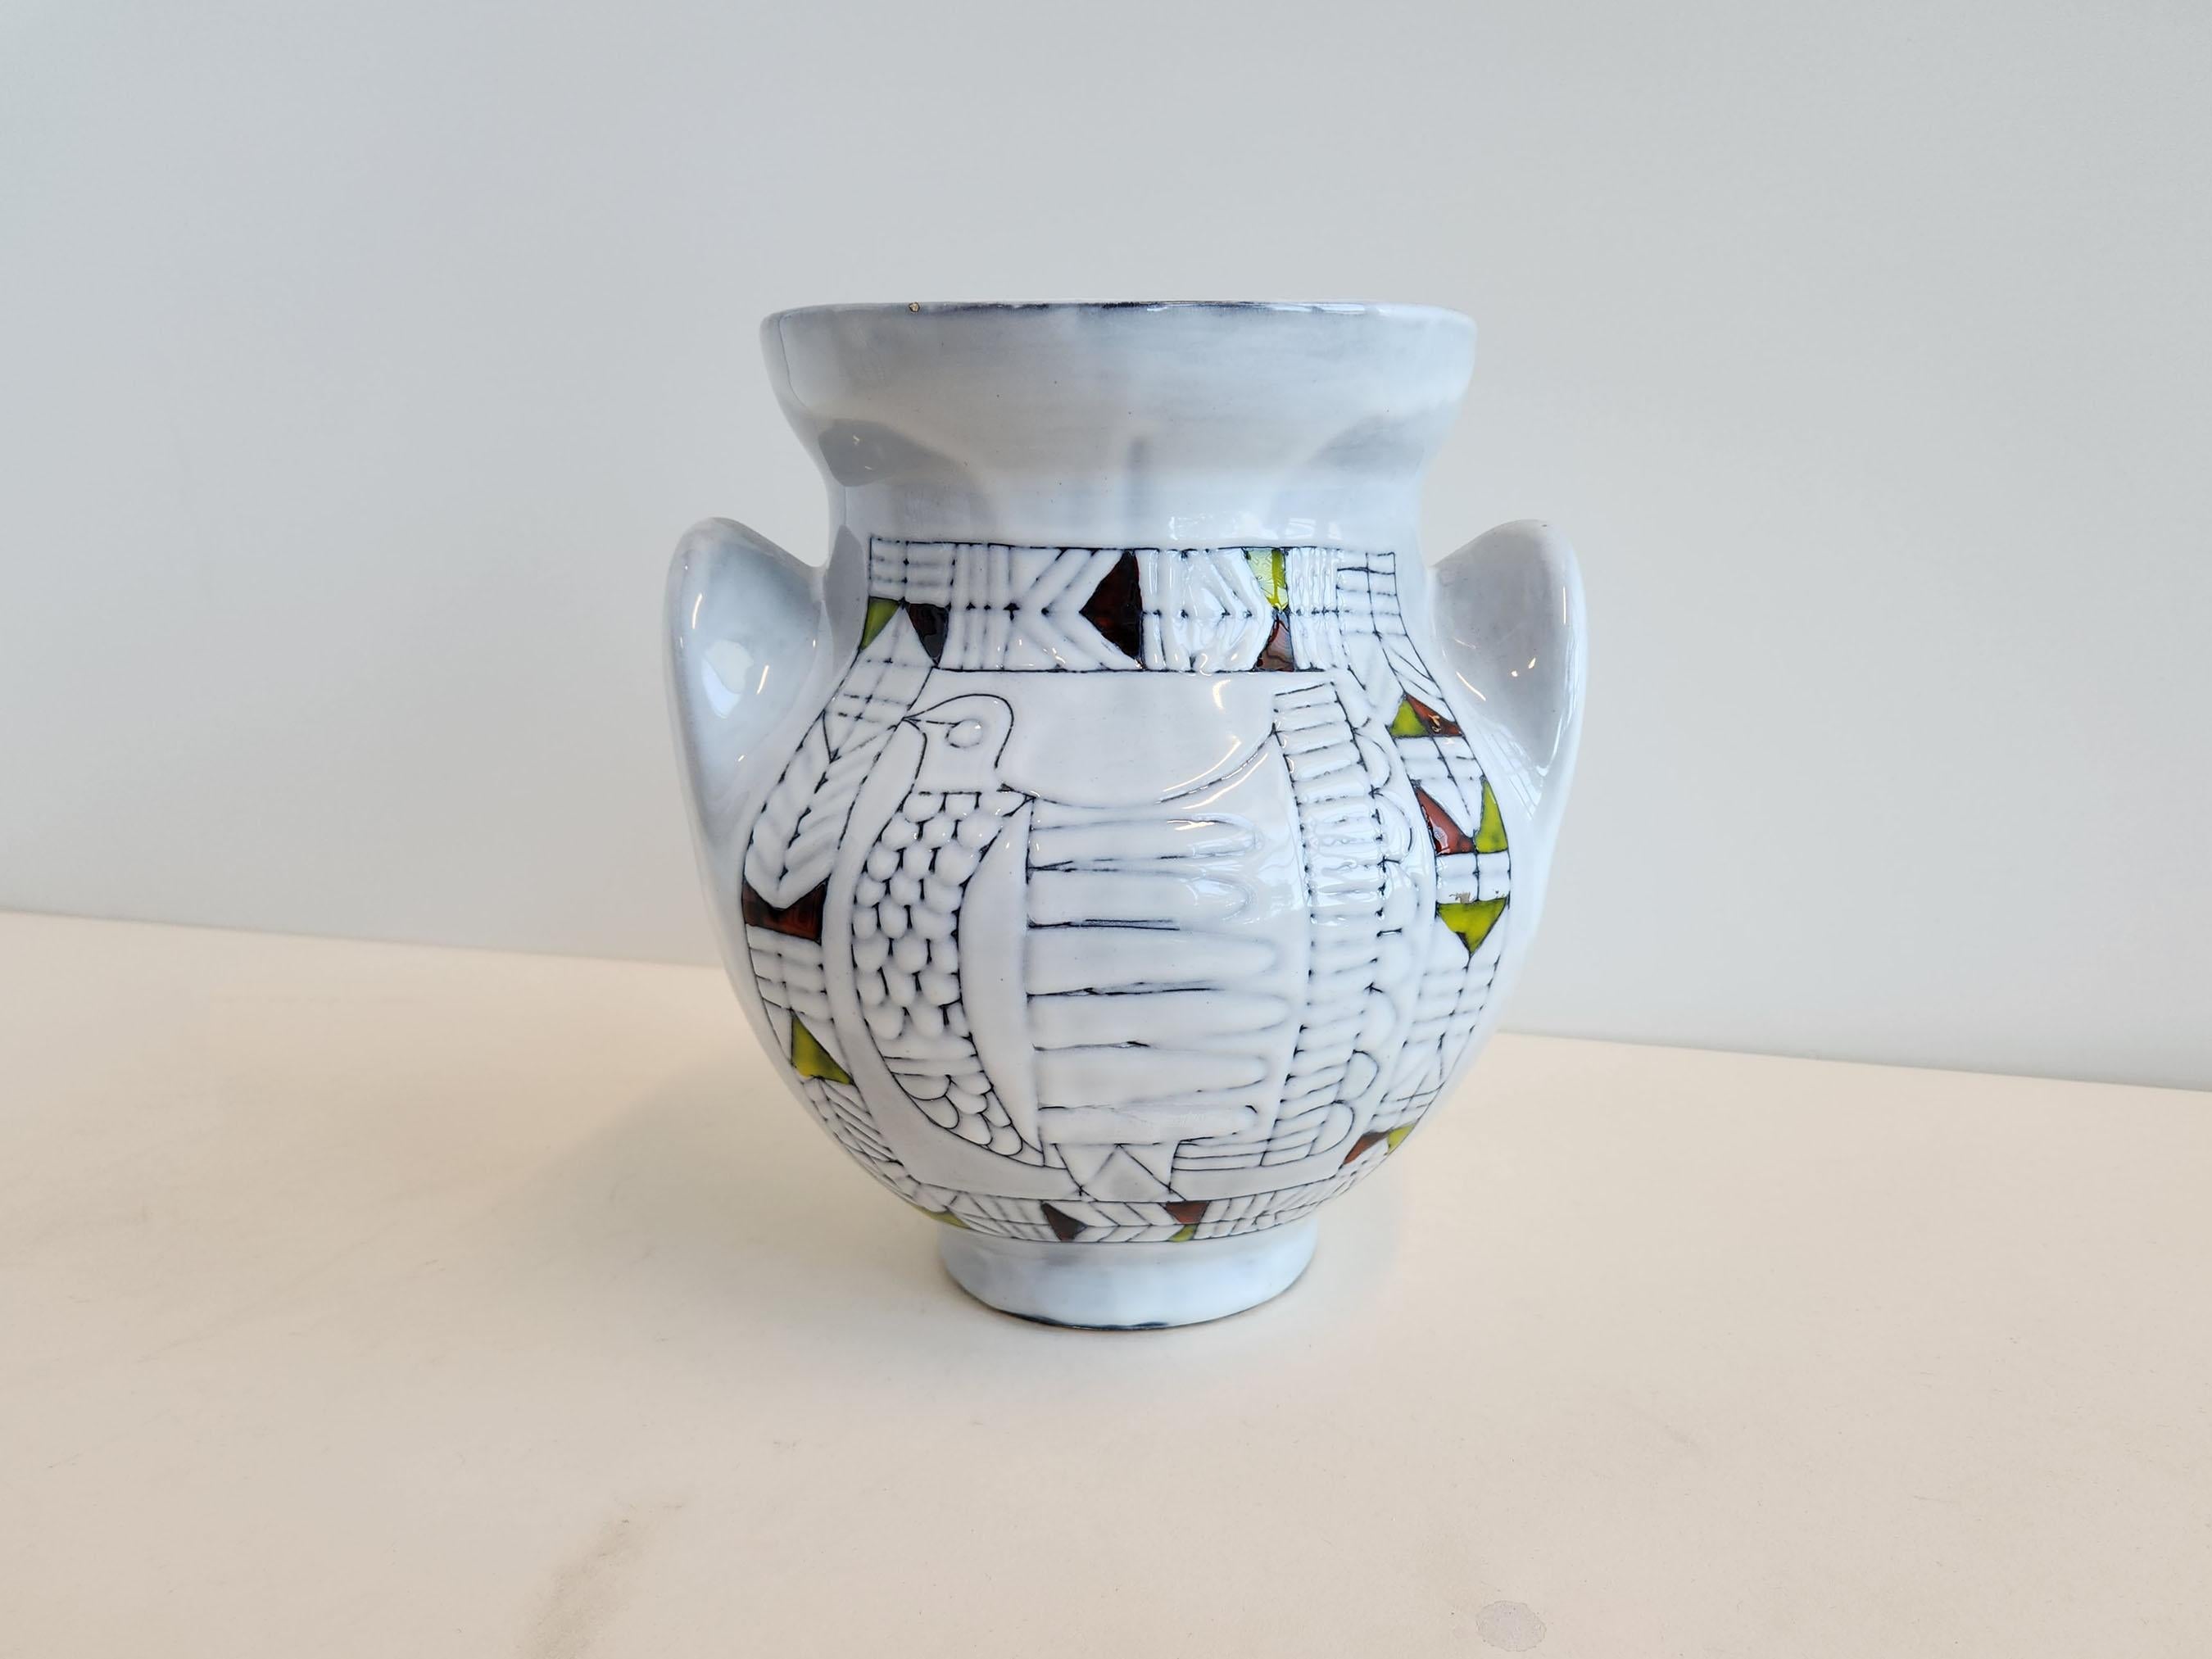 Vintage ceramic vase with abstract design by Roger Capron.

Vallauris, France

Roger Capron was in influential French ceramicist, known for his tiled tables and his use of recurring motifs such as stylized branches and geometrical suns. He was born